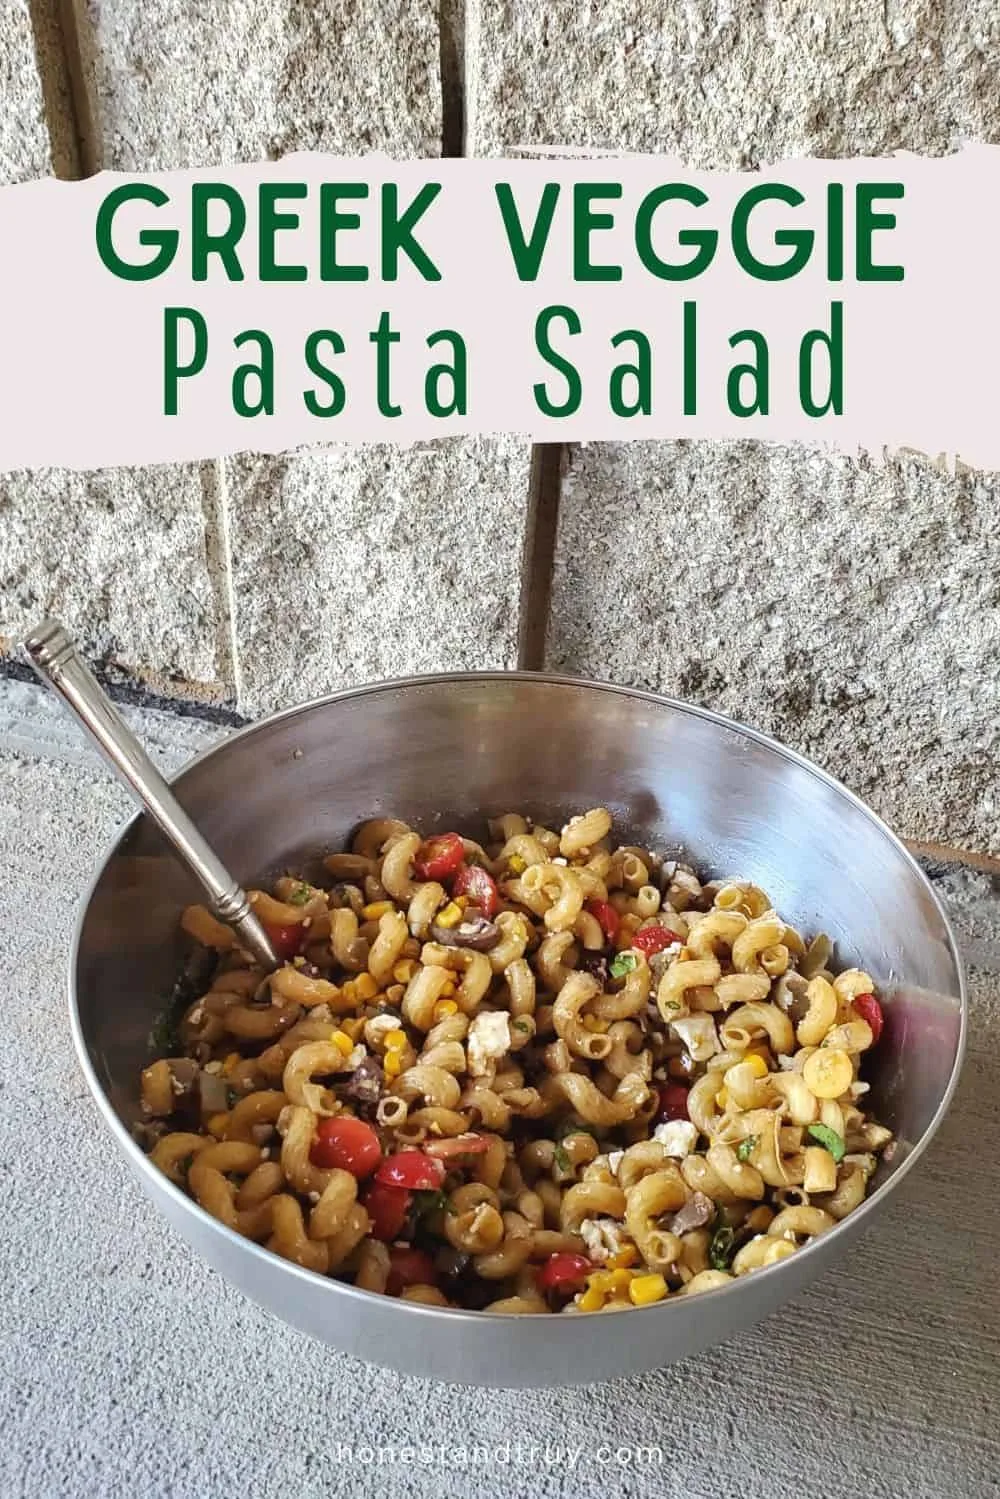 Greek veggie pasta salad in a bowl with a stone wall behind.